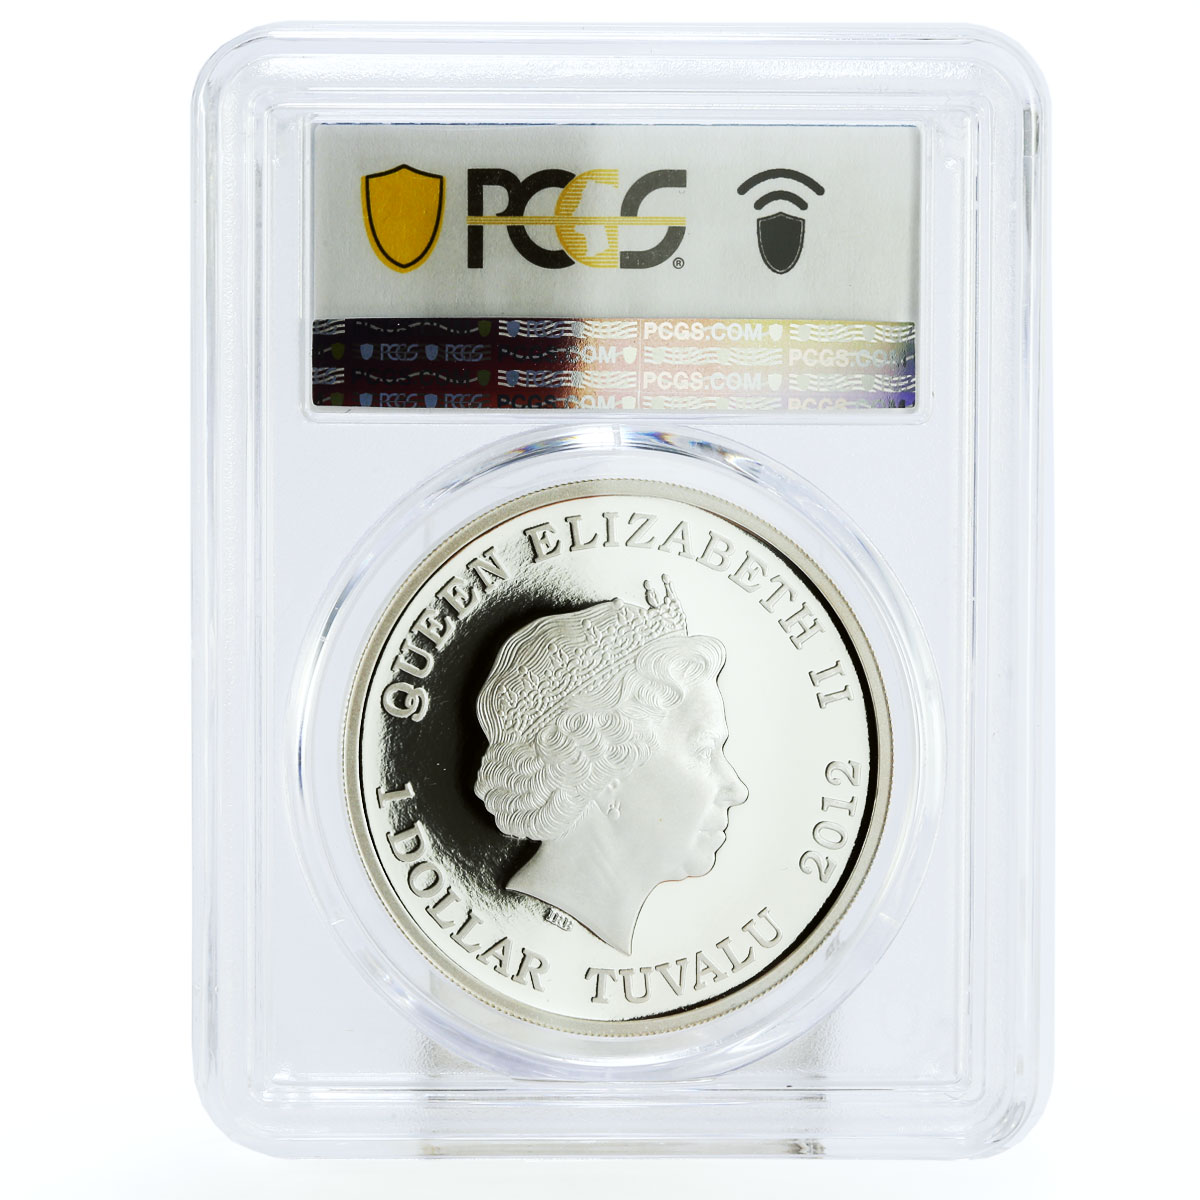 Tuvalu 1 dollar 100 Years Titanic Ship Liner PR70 PCGS colored silver coin 2012